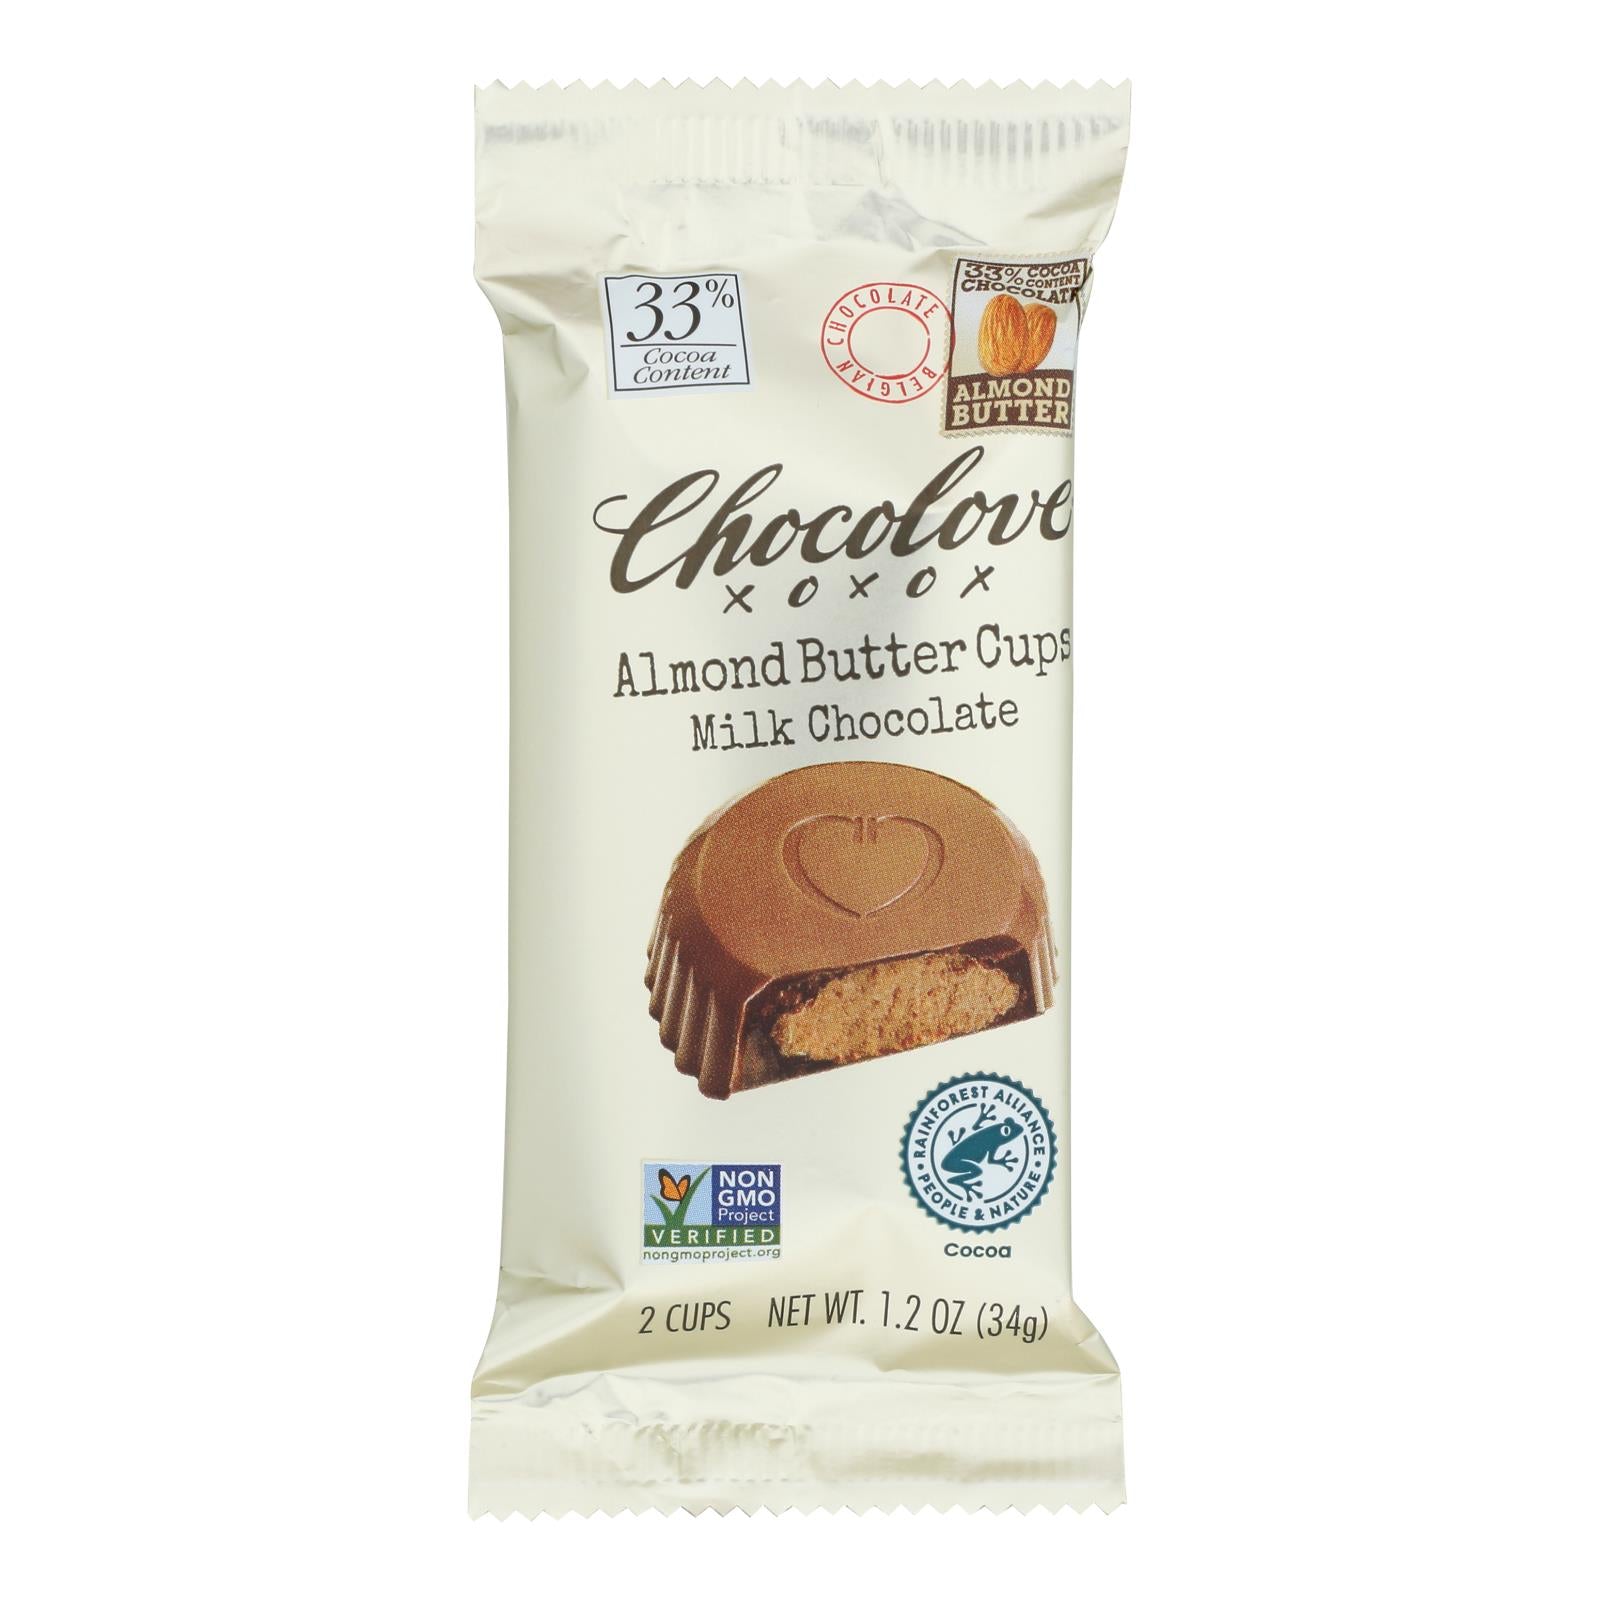 Chocolove - Cup Almond Butter Milk Chocolate - Case of 10 - 1.2 Ounces